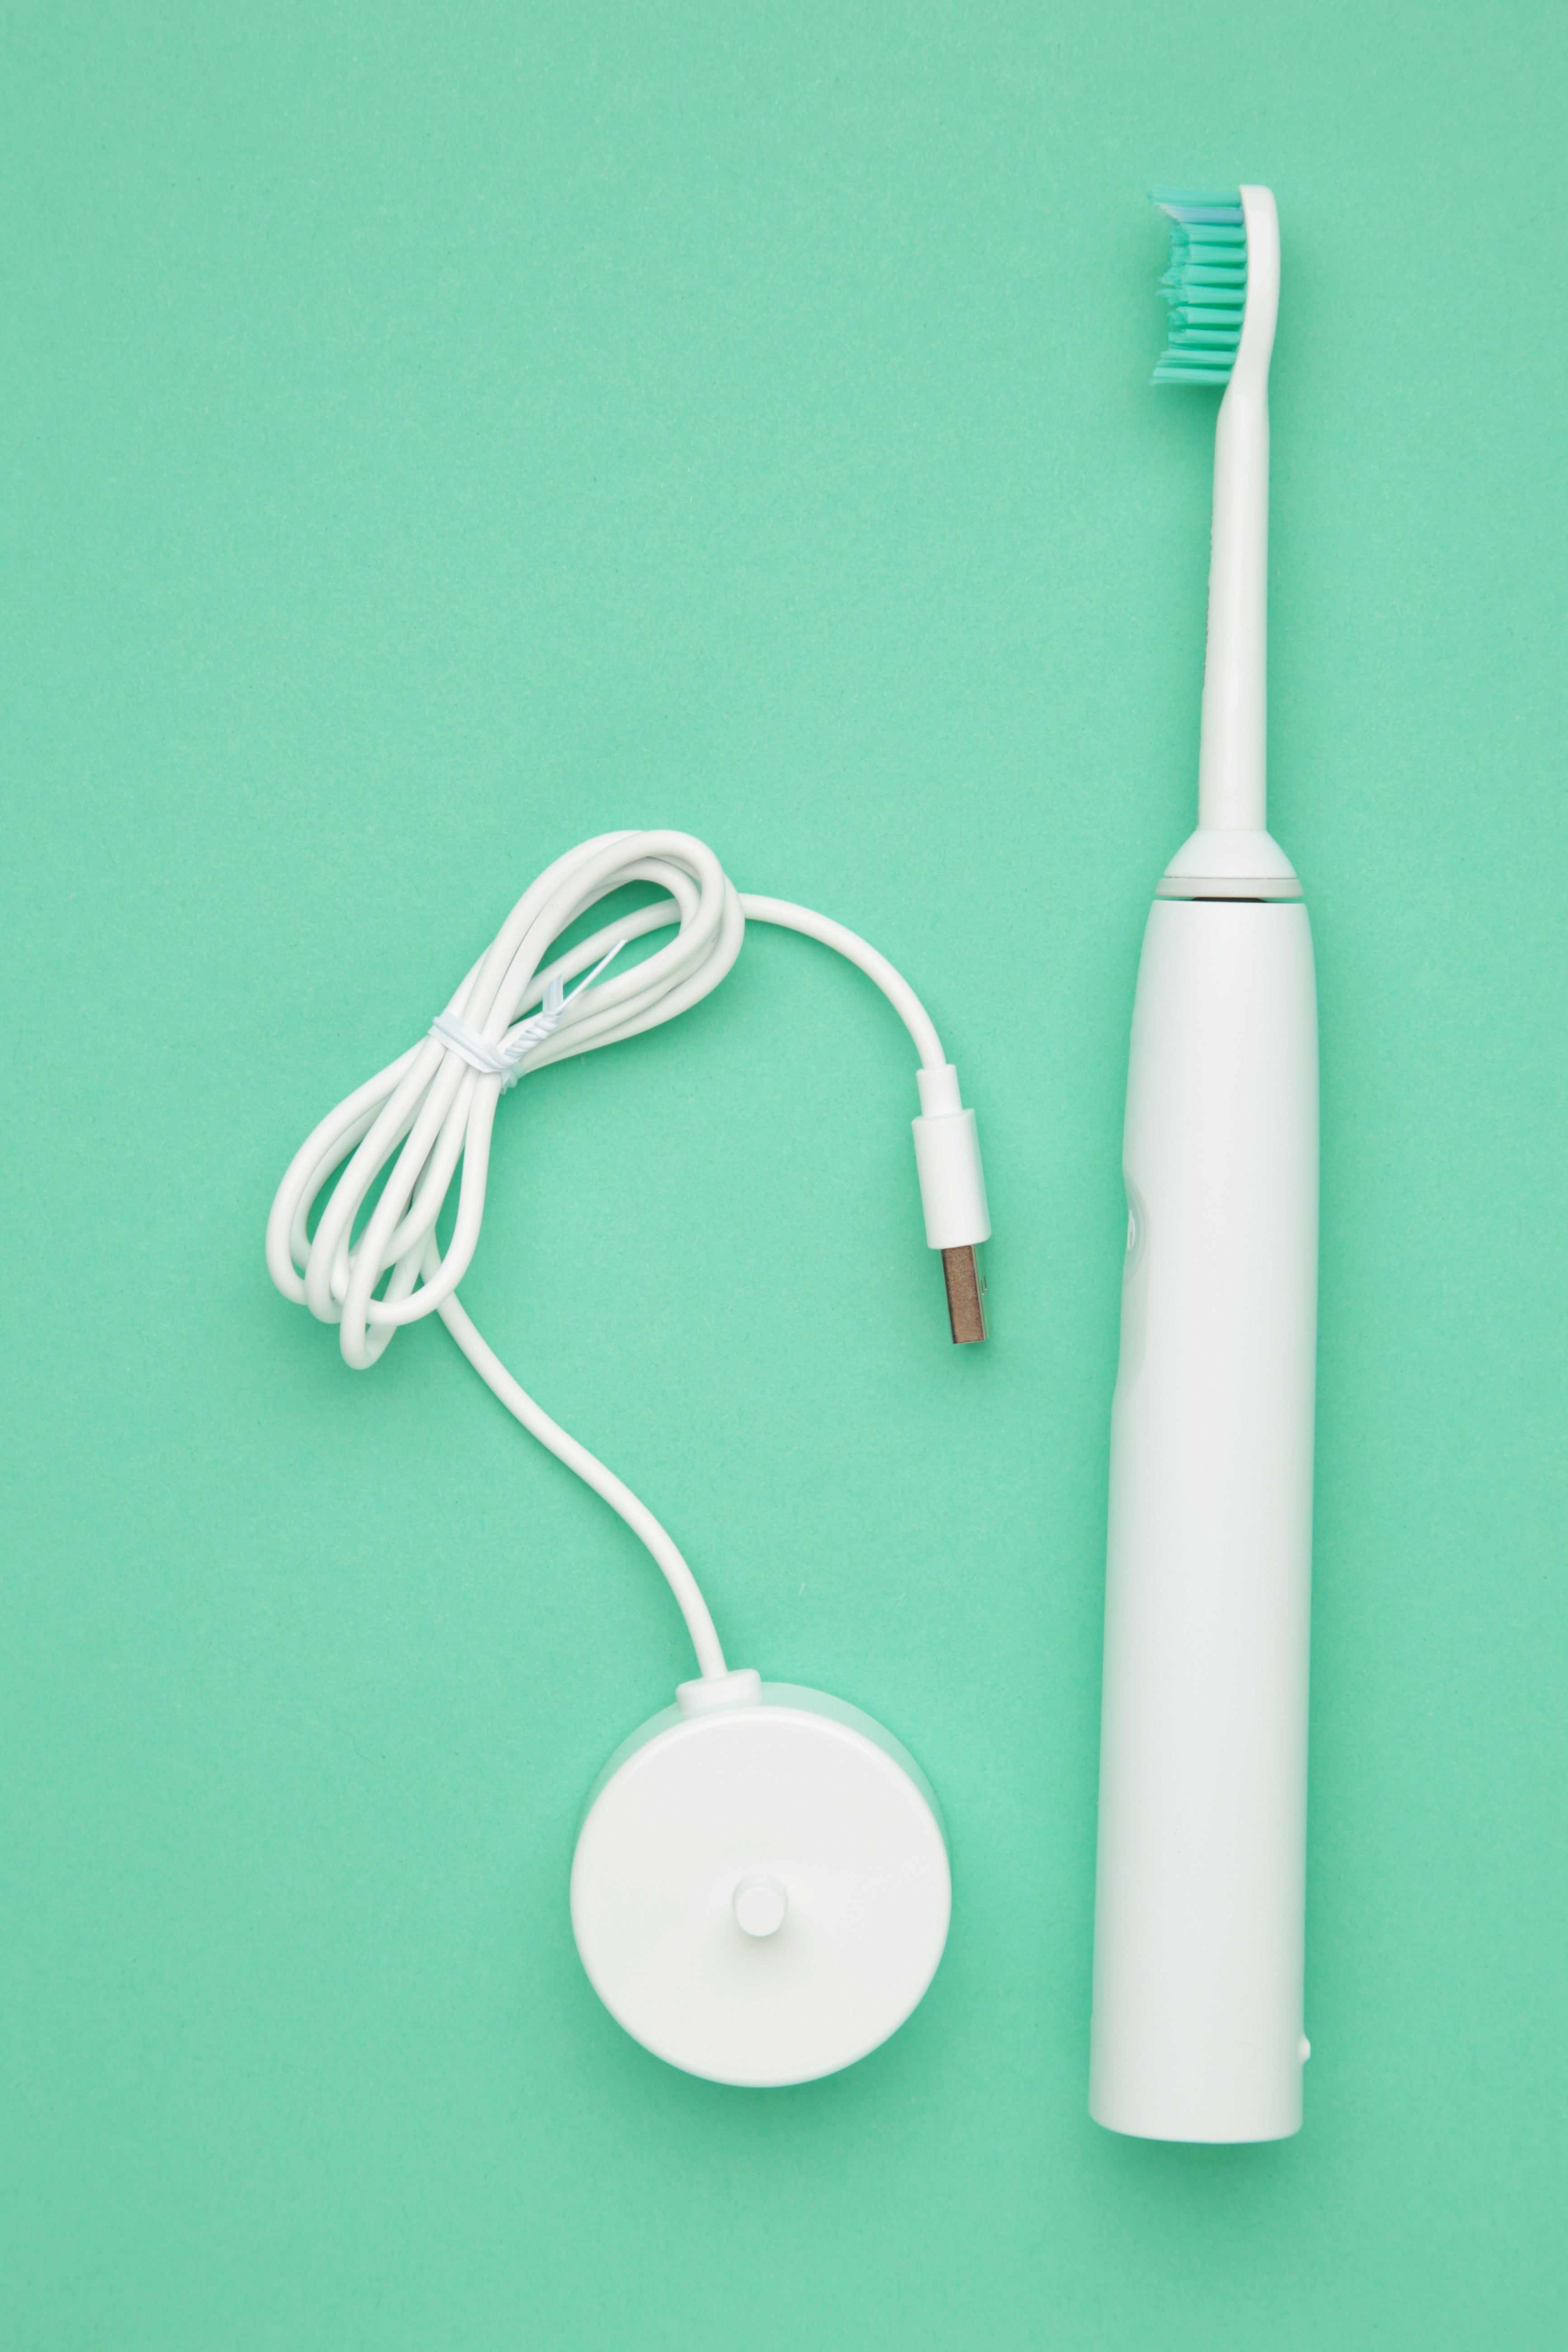 An electric toothbrush with charging case